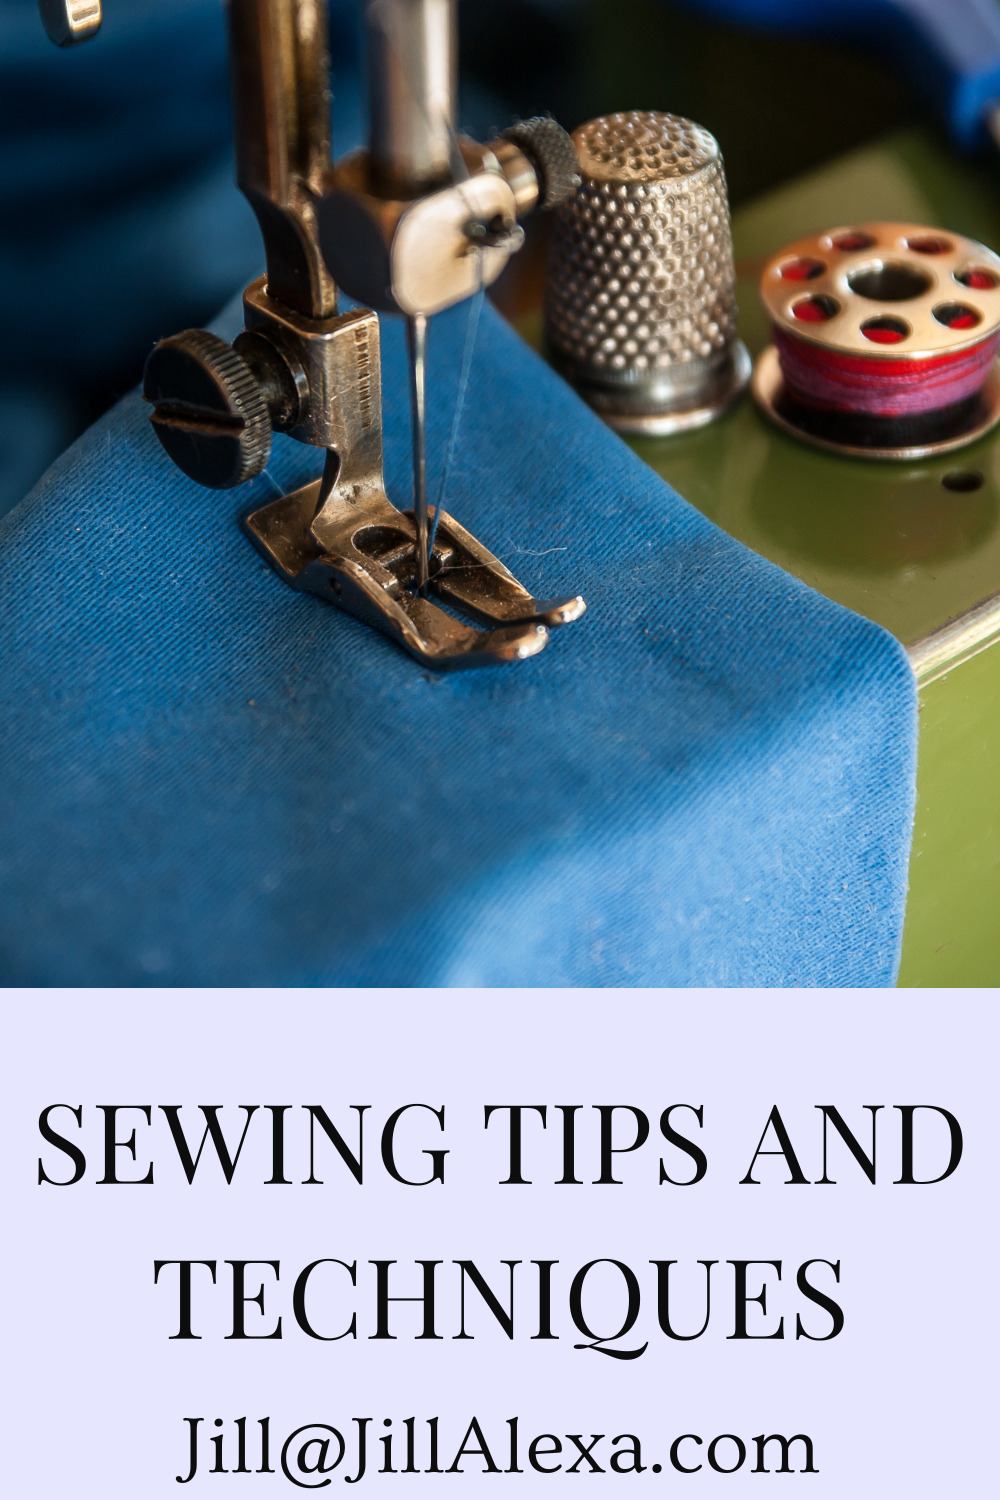 Sewing is such a rewarding, fulfilling pastime and when you master the techniques and become proficient it can become a business. After many years of sewing for myself, my family, friends and then as a business owner. These are some of the tricks of the trade I have learned along the way.